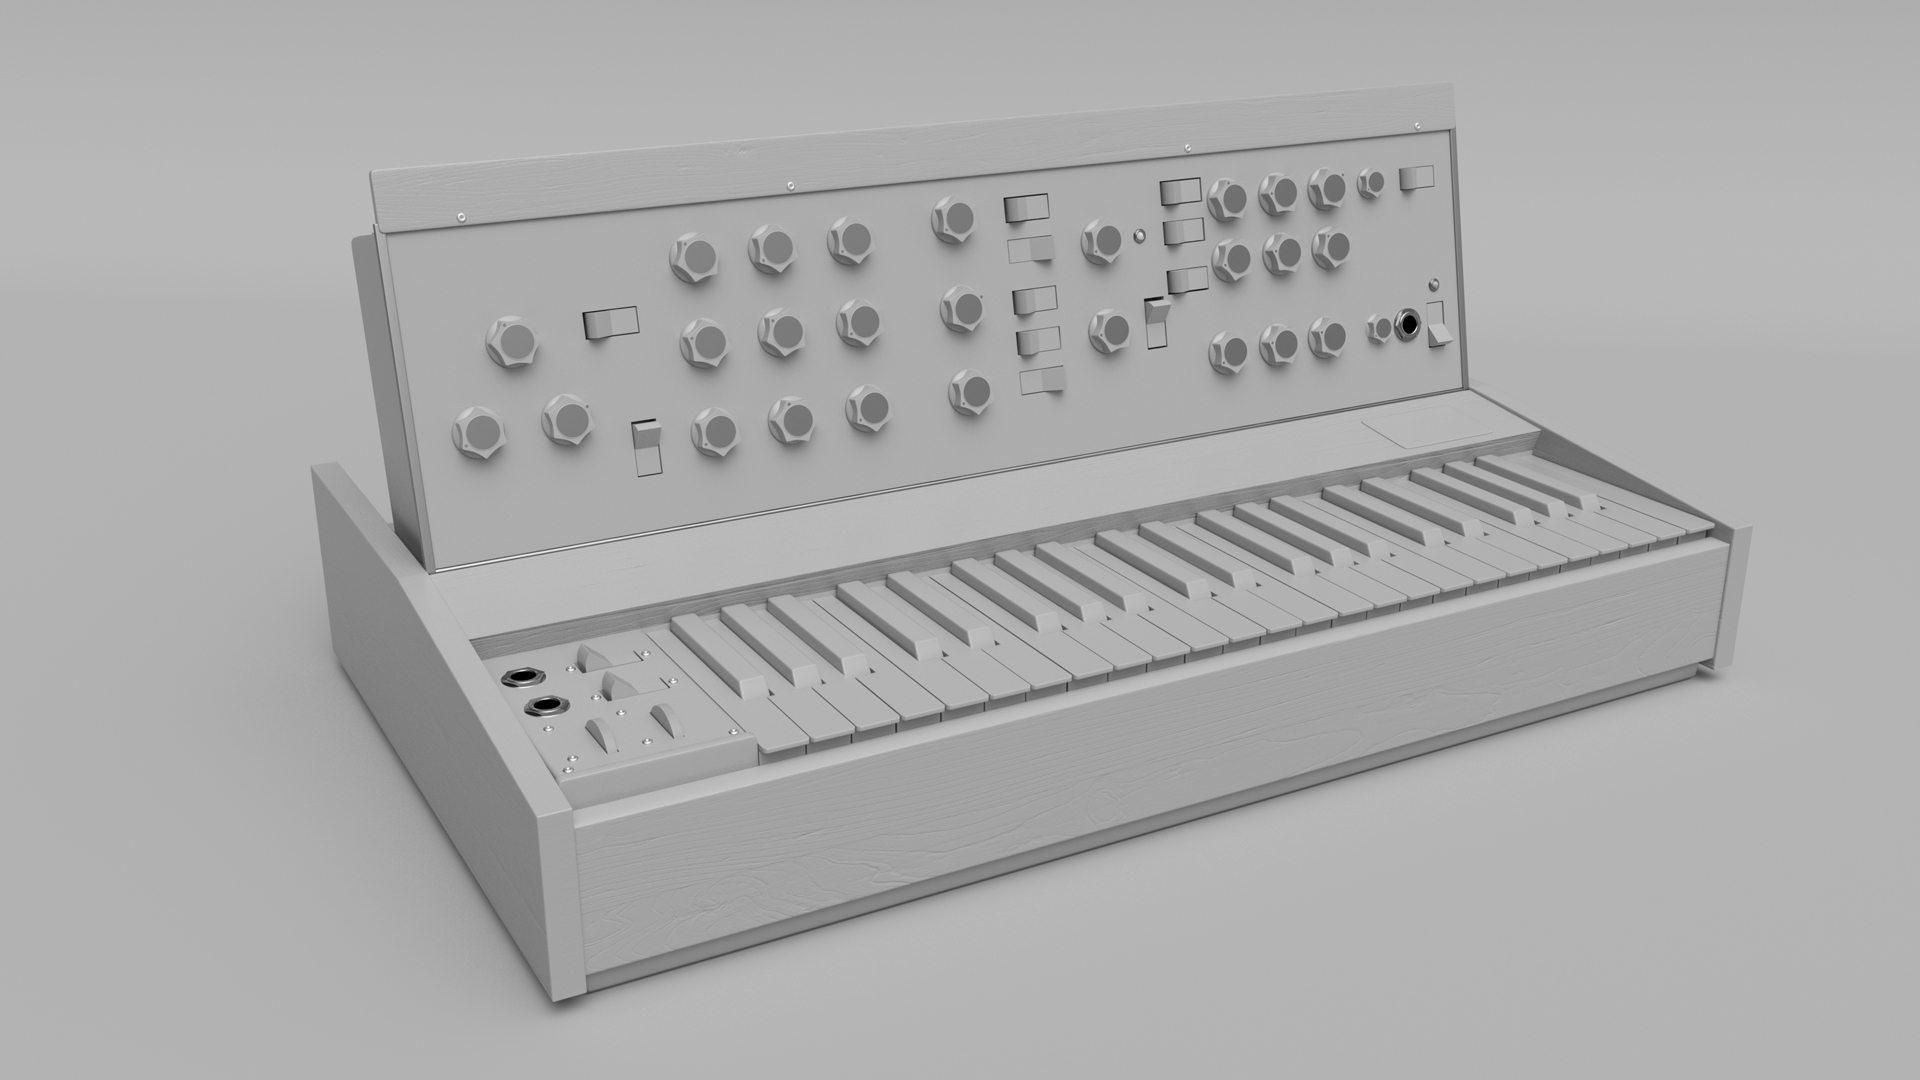 Studio Desk and Retro Synth by: Moonscape Graphics, 3D Models by Daz 3D